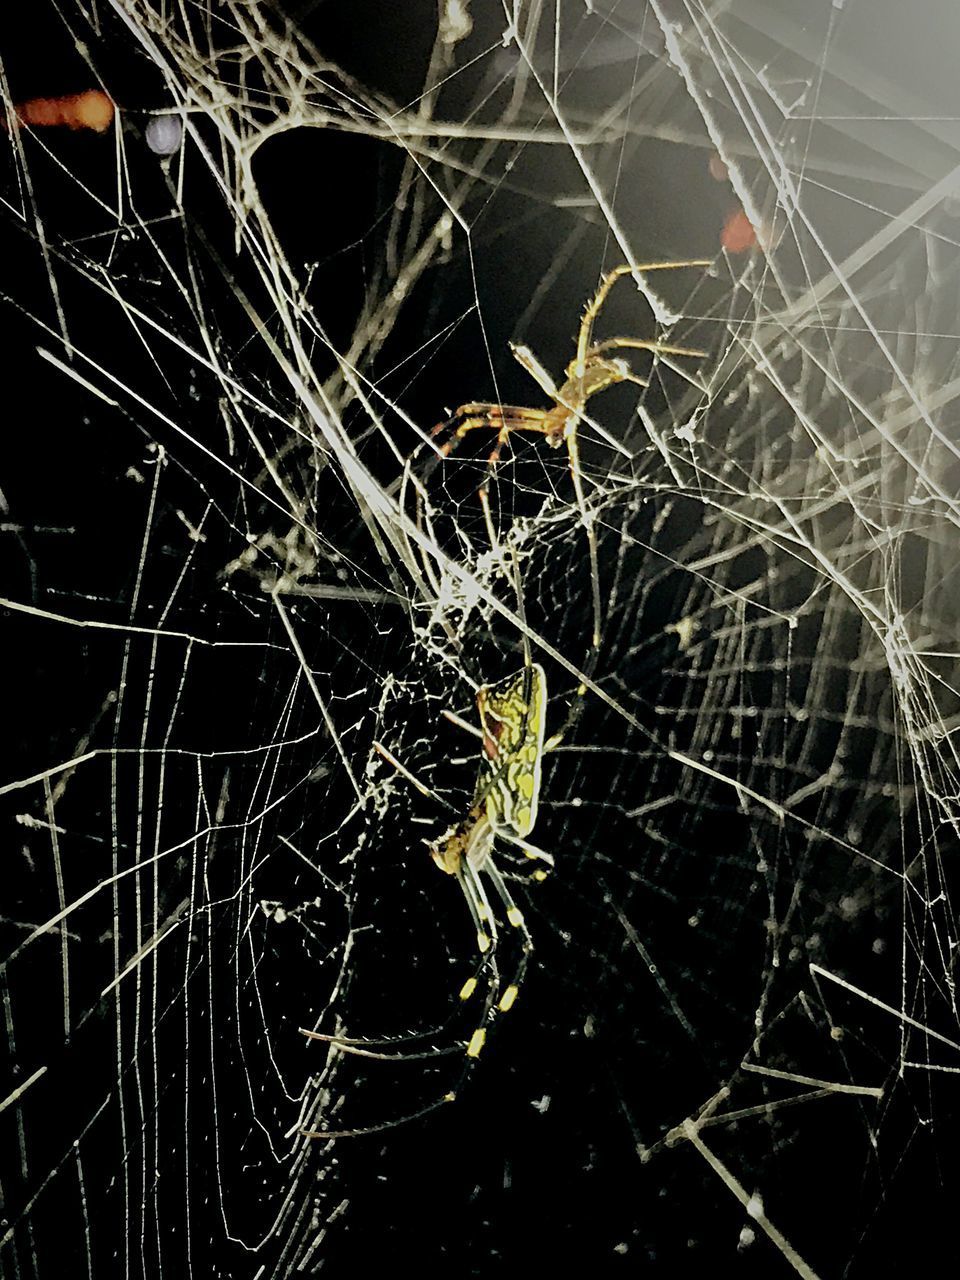 CLOSE-UP OF SPIDER AND WEB AGAINST BLURRED BACKGROUND